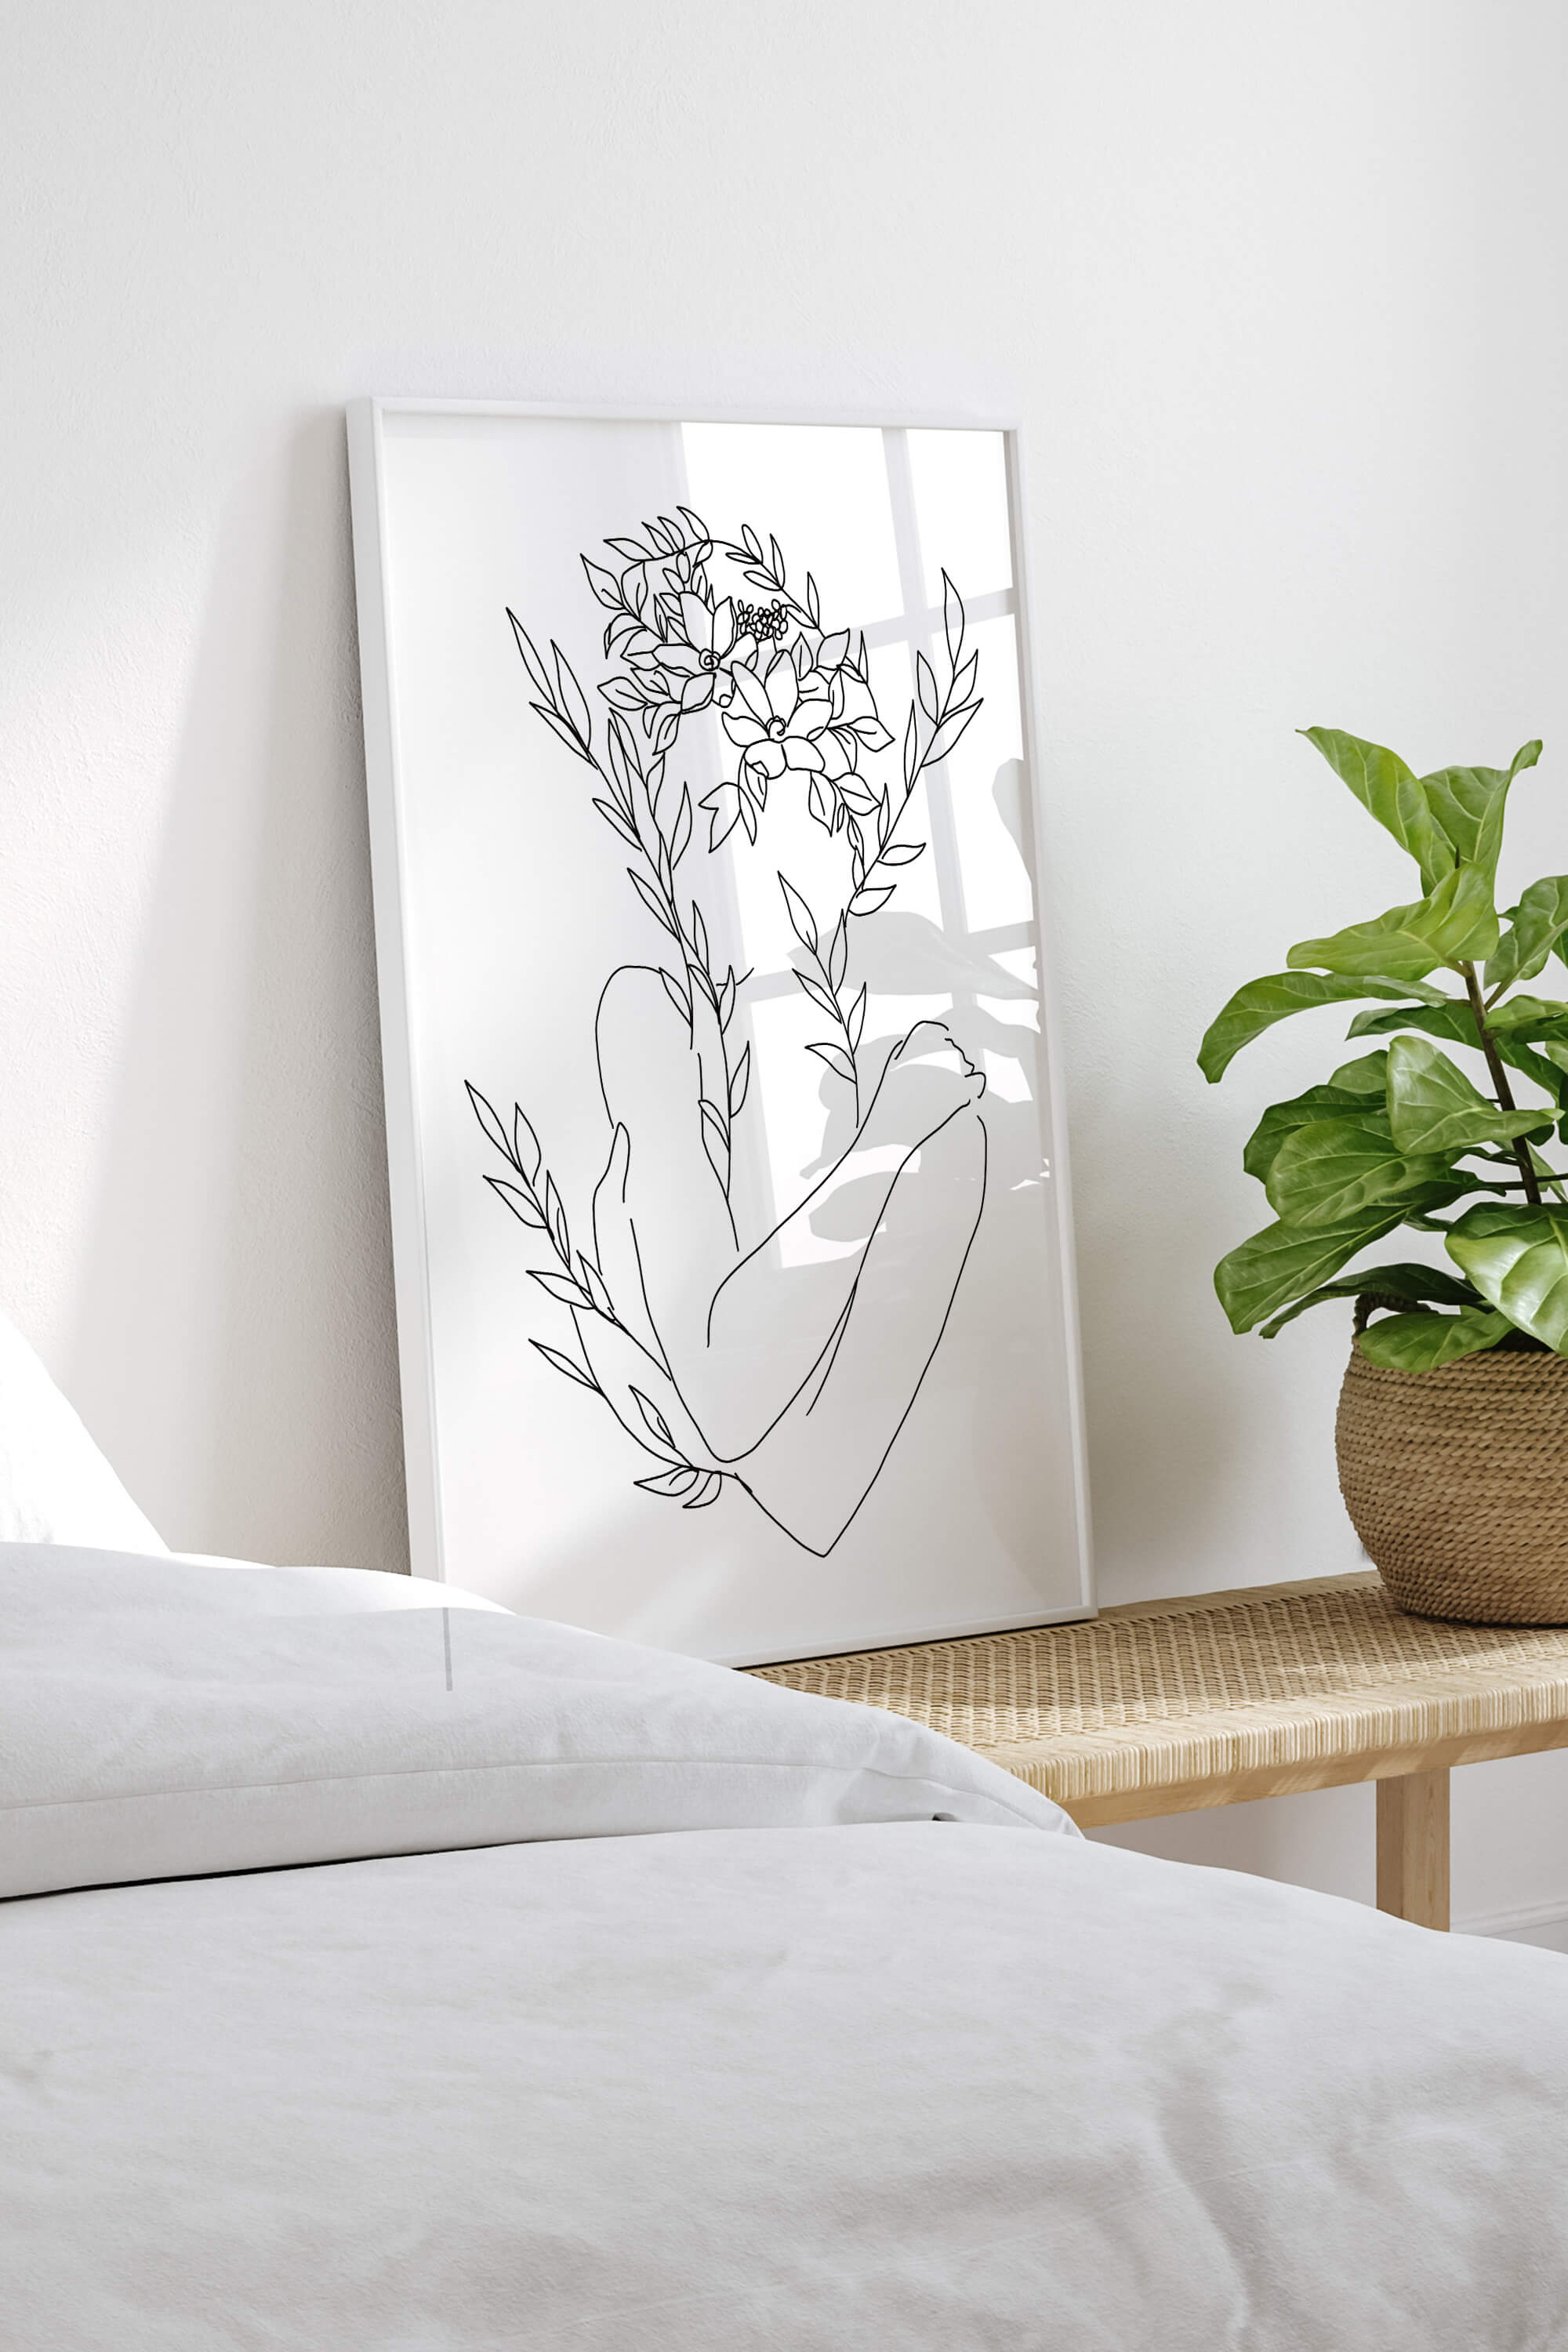 An abstract celebration of beauty through line art and floral silhouette. This piece reflects diversity and individuality with a captivating combination of abstract elements and the female form.